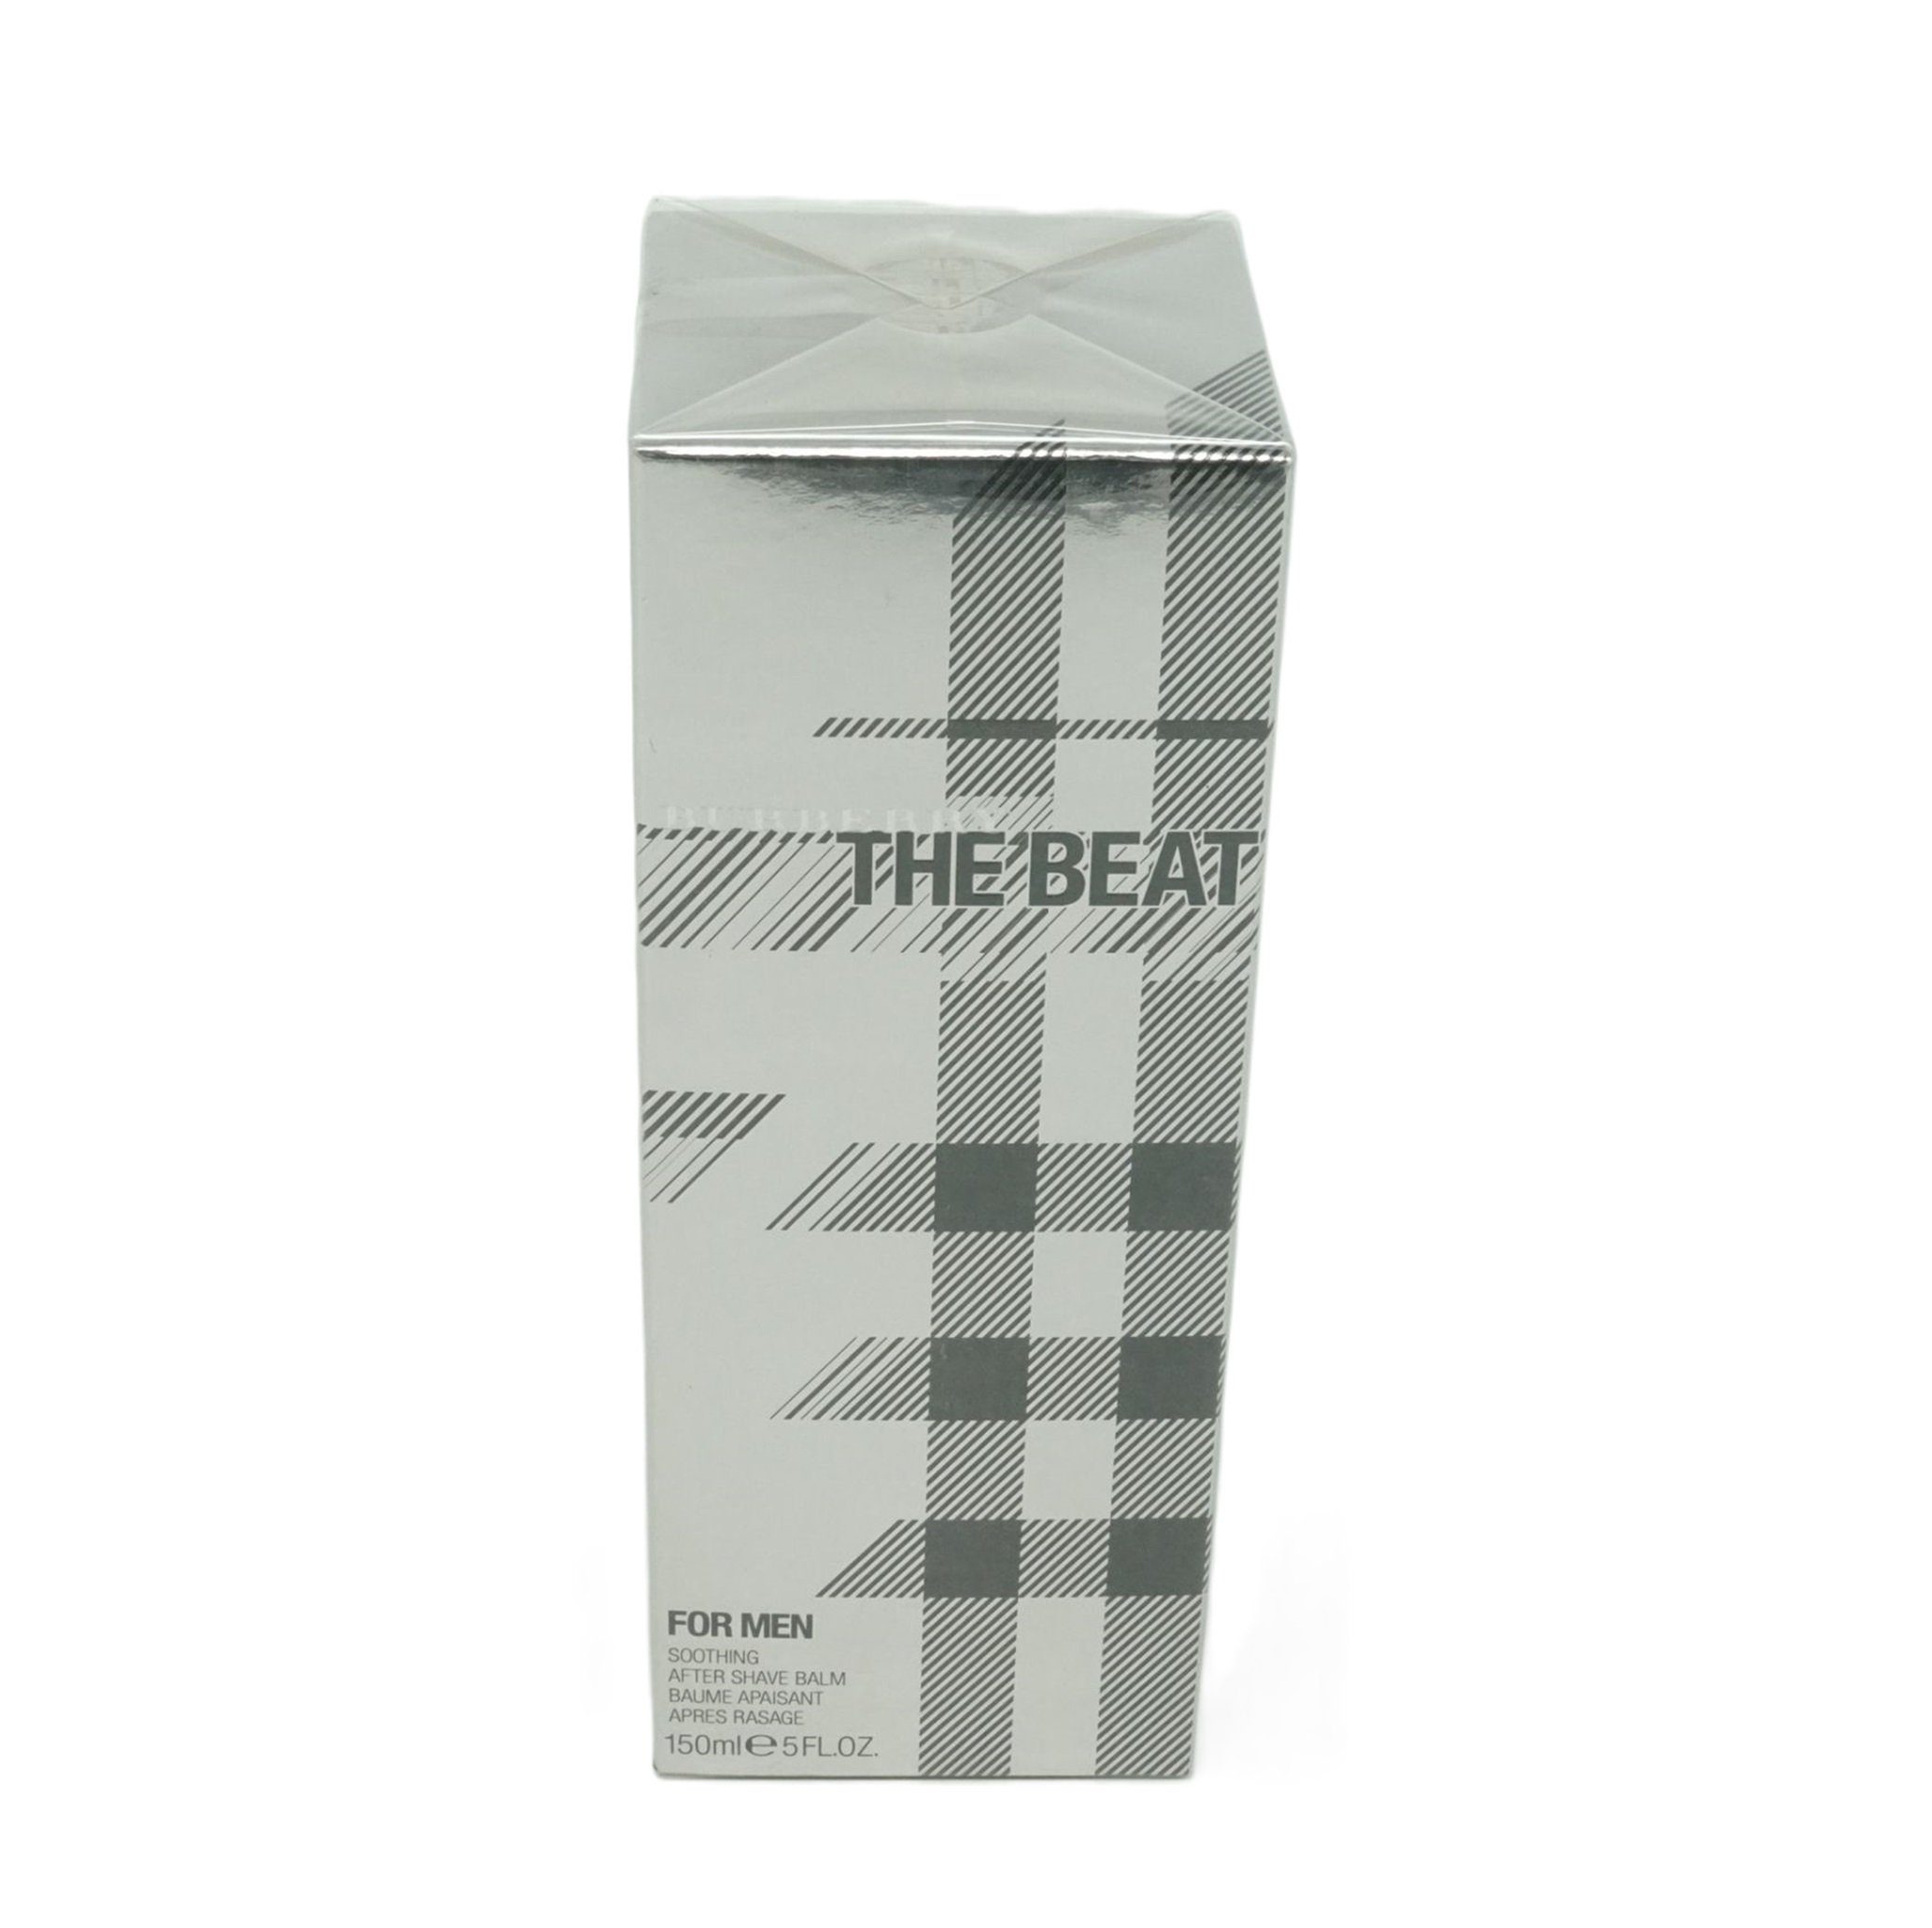 BURBERRY After-Shave Balsam Burberry The Beat For Men After Shave Balm 150ml